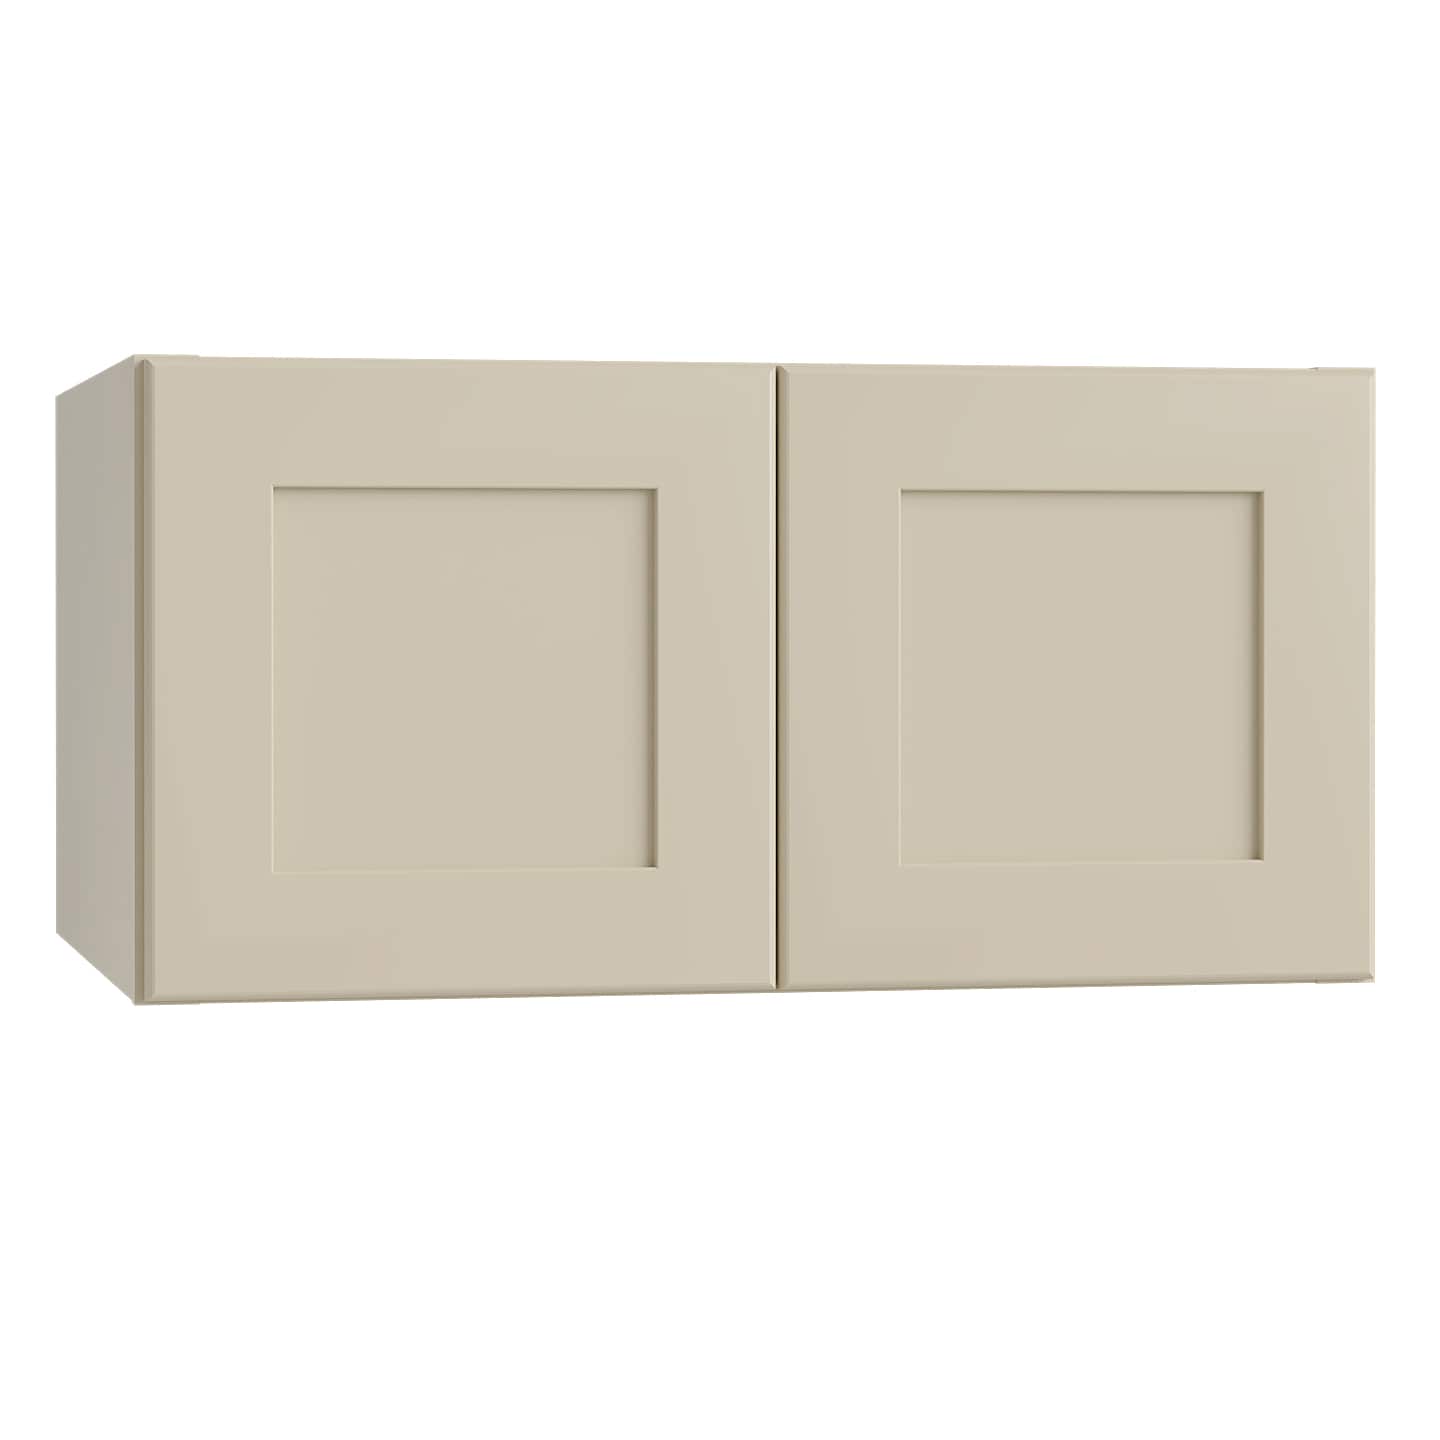 Luxxe Cabinetry 33-in W x 15-in H x 24-in D Norfolk Blended Cream Painted Door Wall Fully Assembled Semi-custom Cabinet in Off-White | W332415-NBC